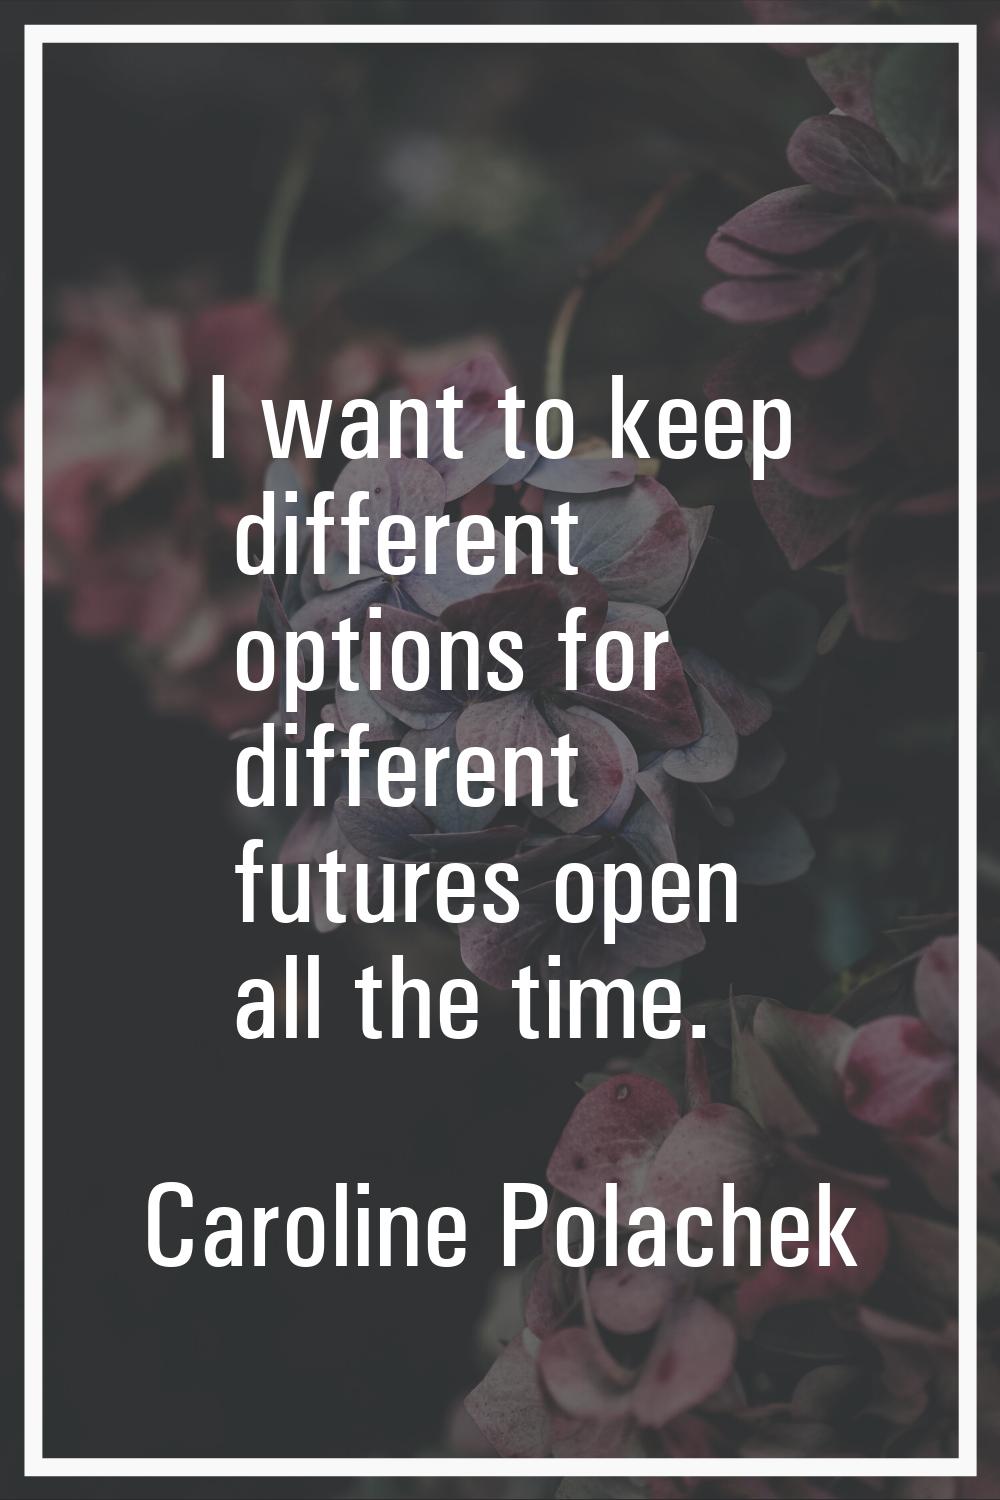 I want to keep different options for different futures open all the time.